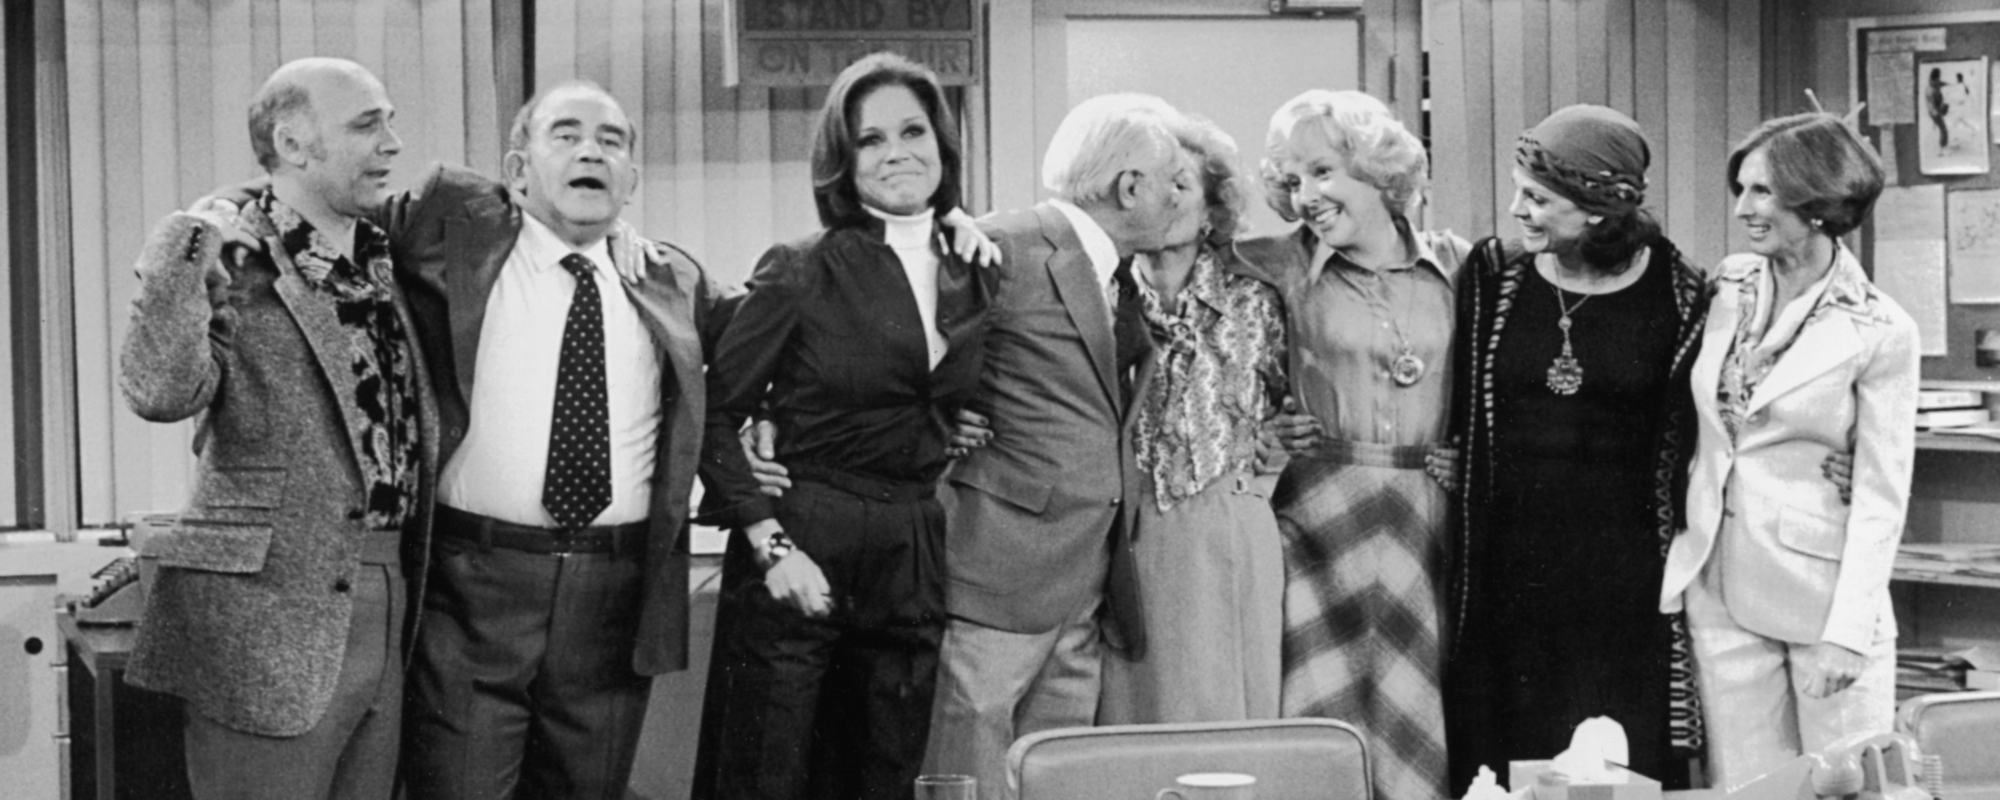 Meet the Writer Behind the Beloved ‘The Mary Tyler Moore Show’ Theme Song